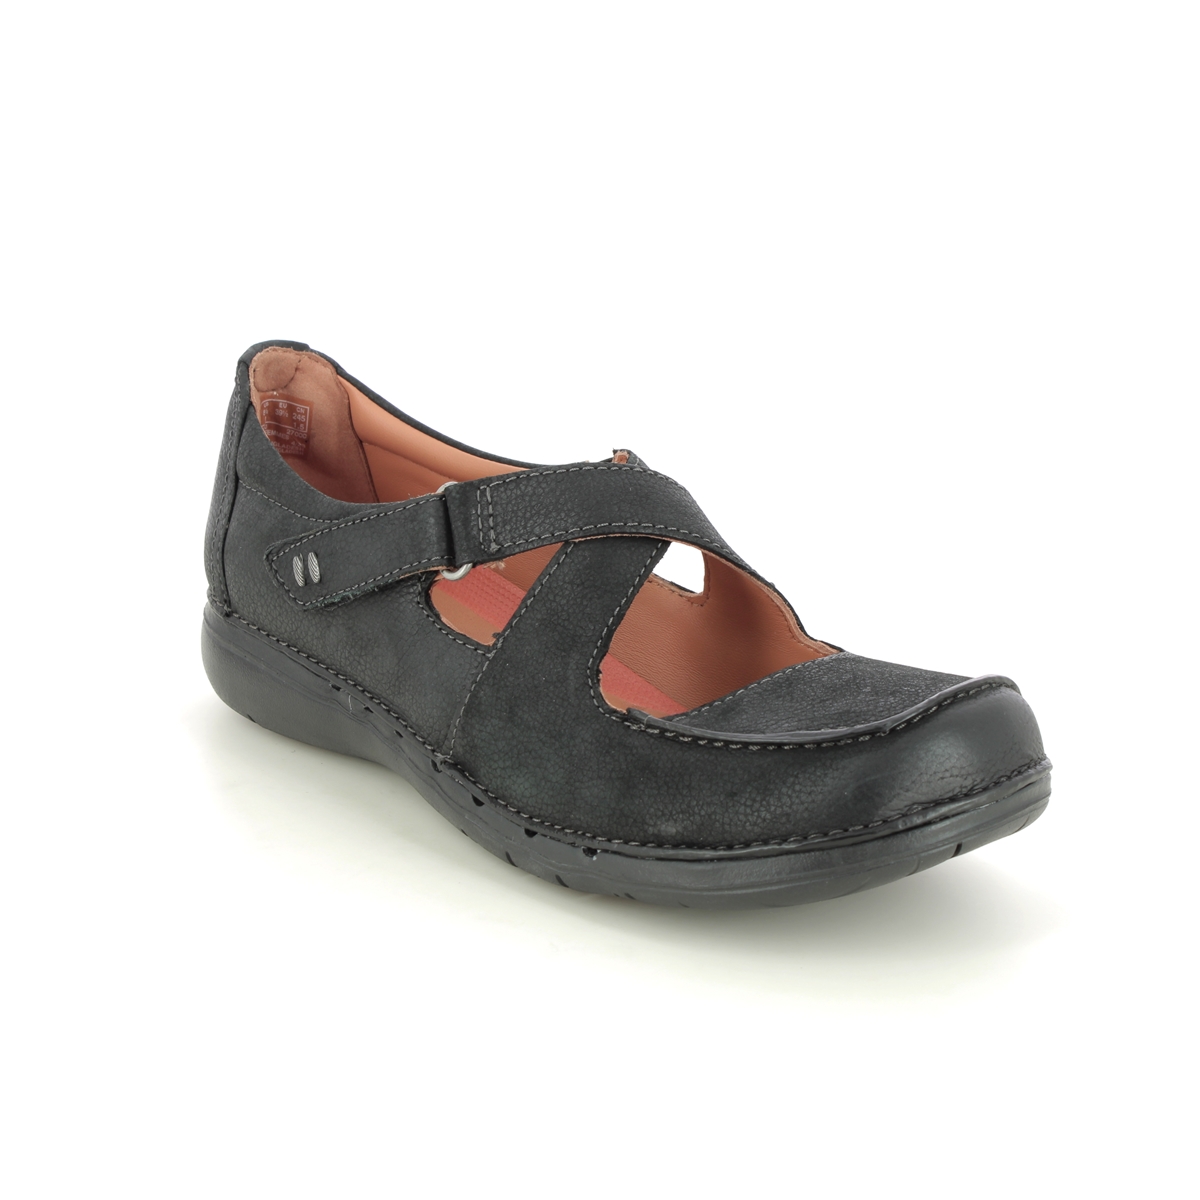 Clarks Un Loop Strap Black Leather Womens Mary Jane Shoes 749704D In Size 5.5 In Plain Black Leather